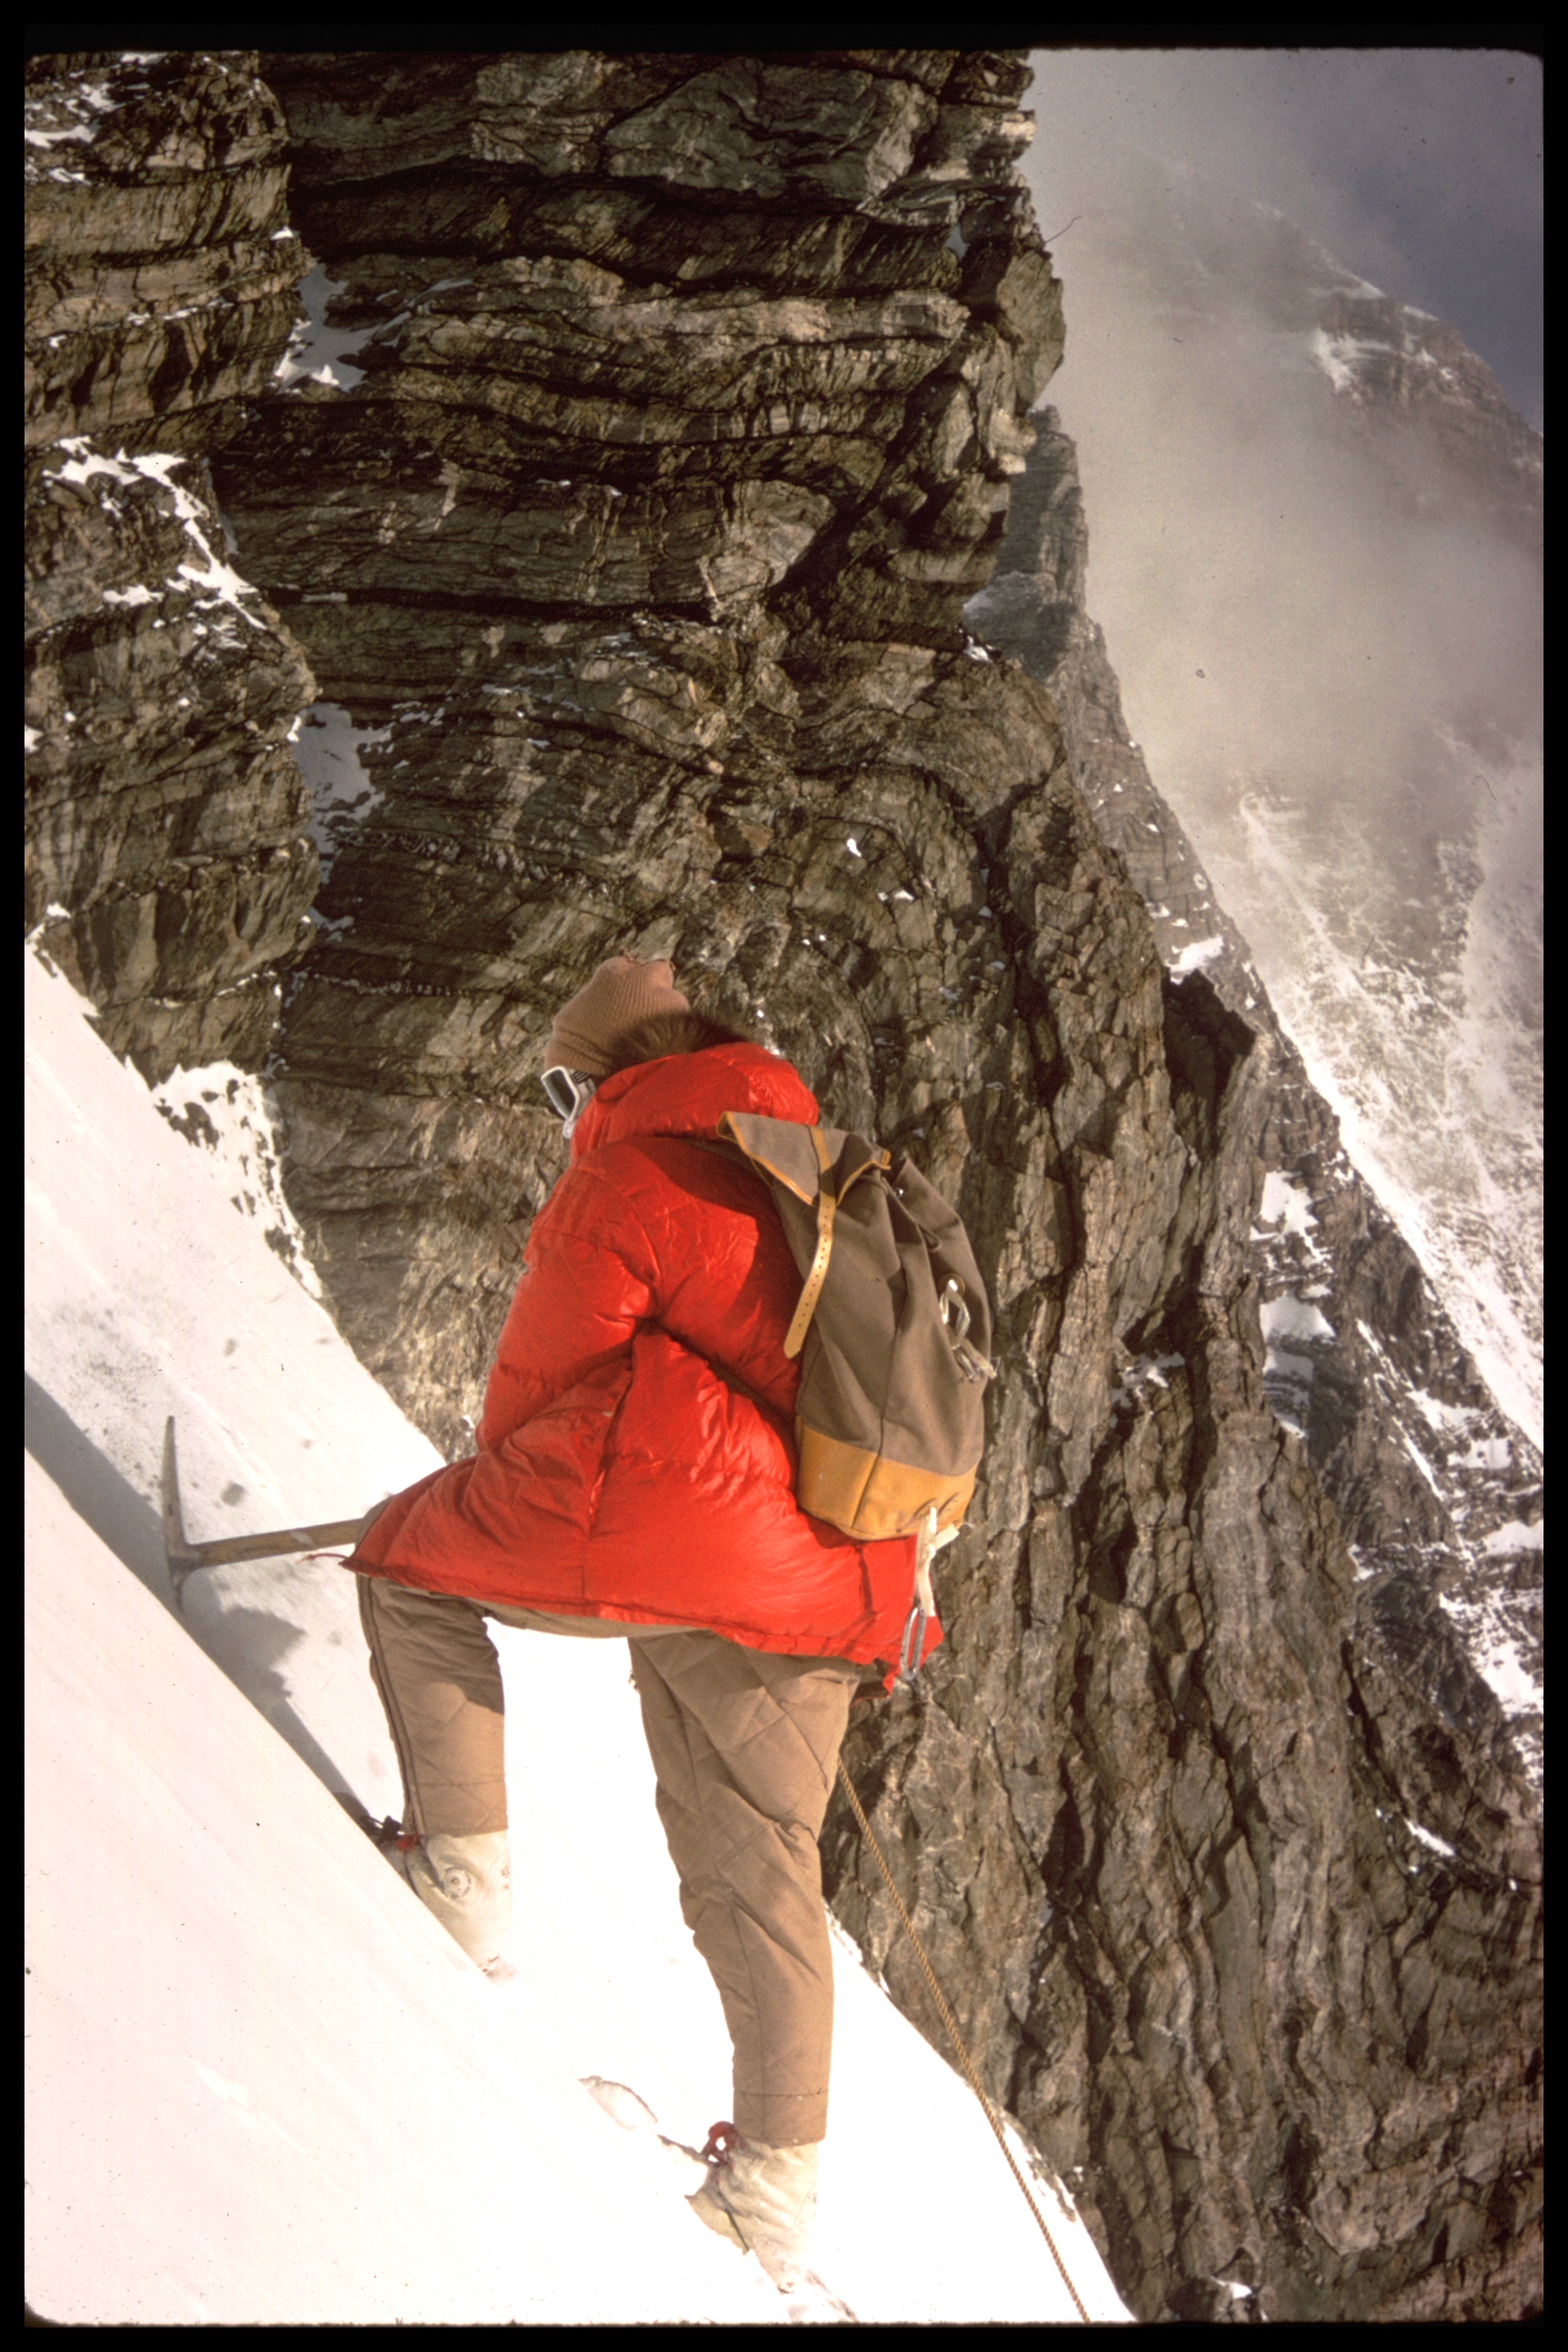  Cutting steps in the snow with an ice axe 